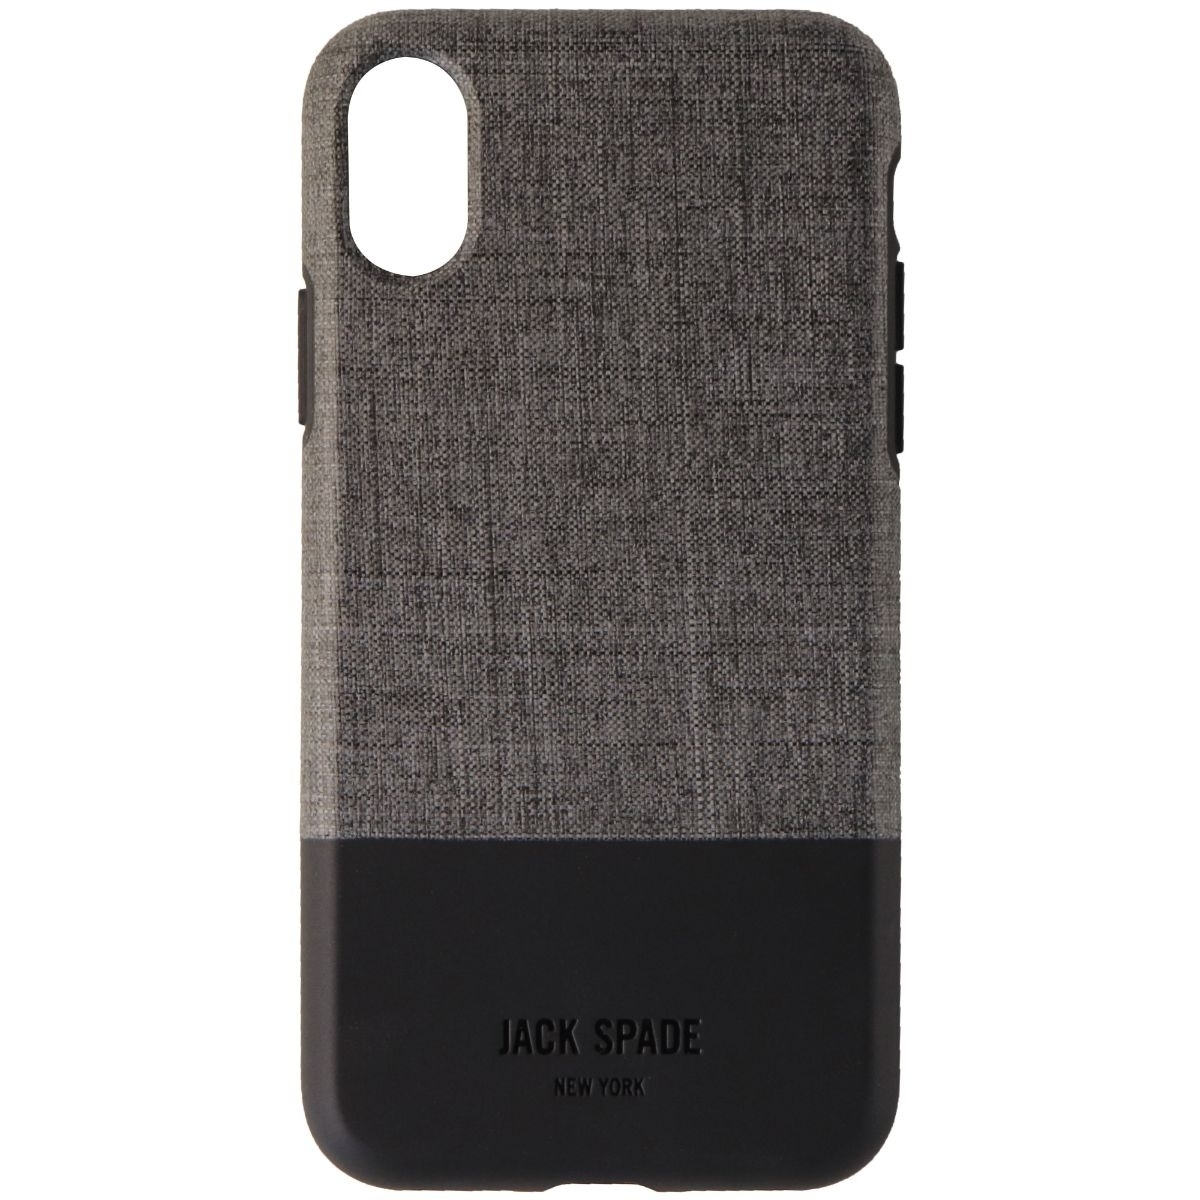 Jack Spade Color-Block Series Hybrid Case For IPhone X - Gray Fabric/Black